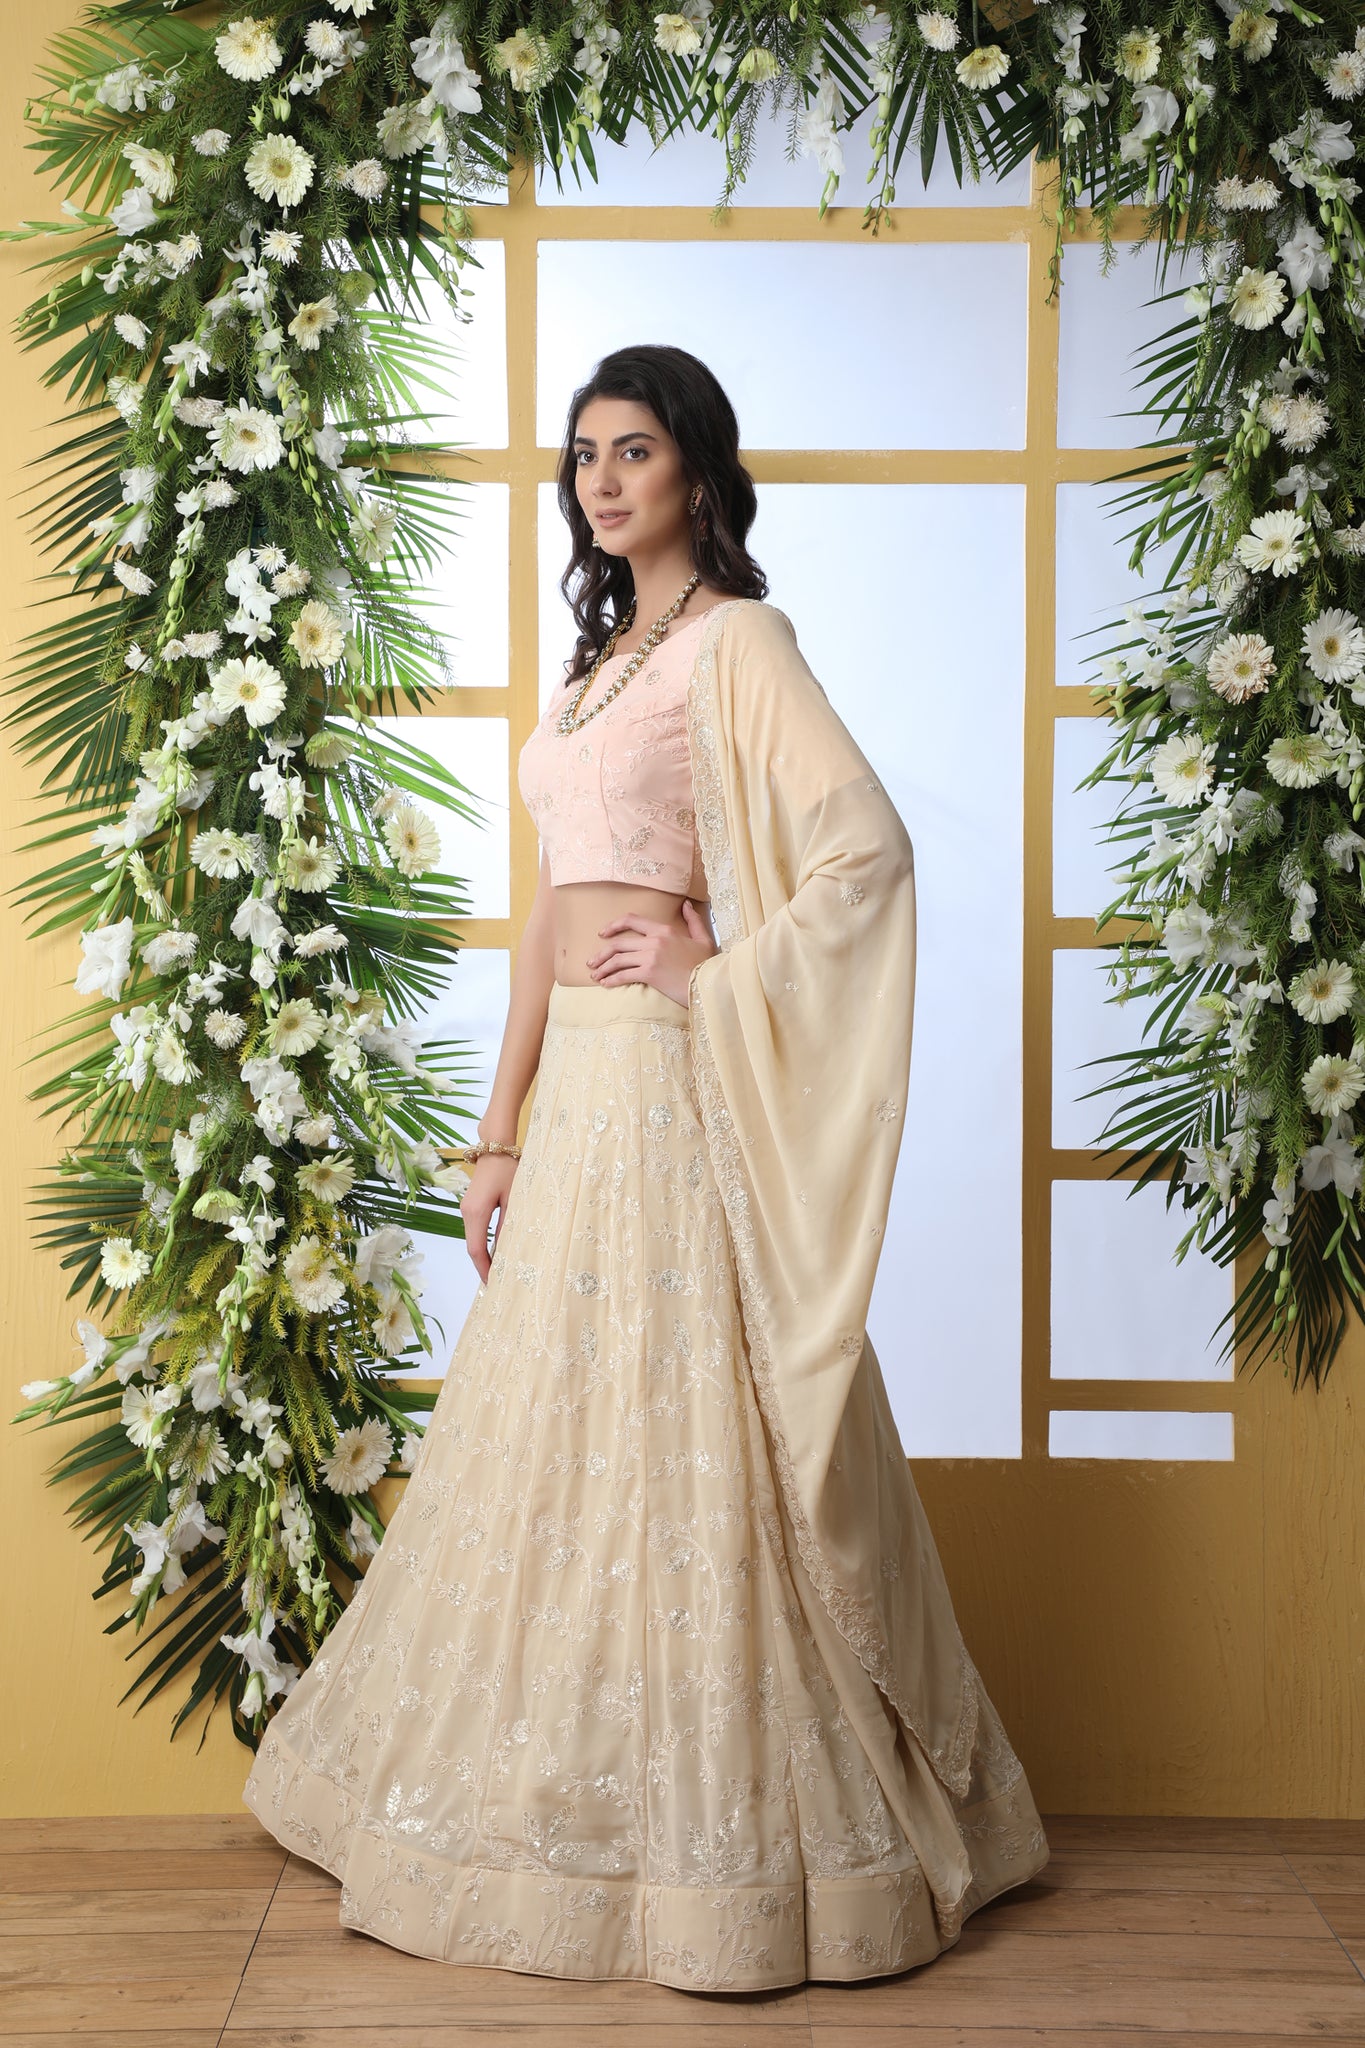 How much would it cost to make a lehenga like this from scratch? :  r/IndianFashionAddicts